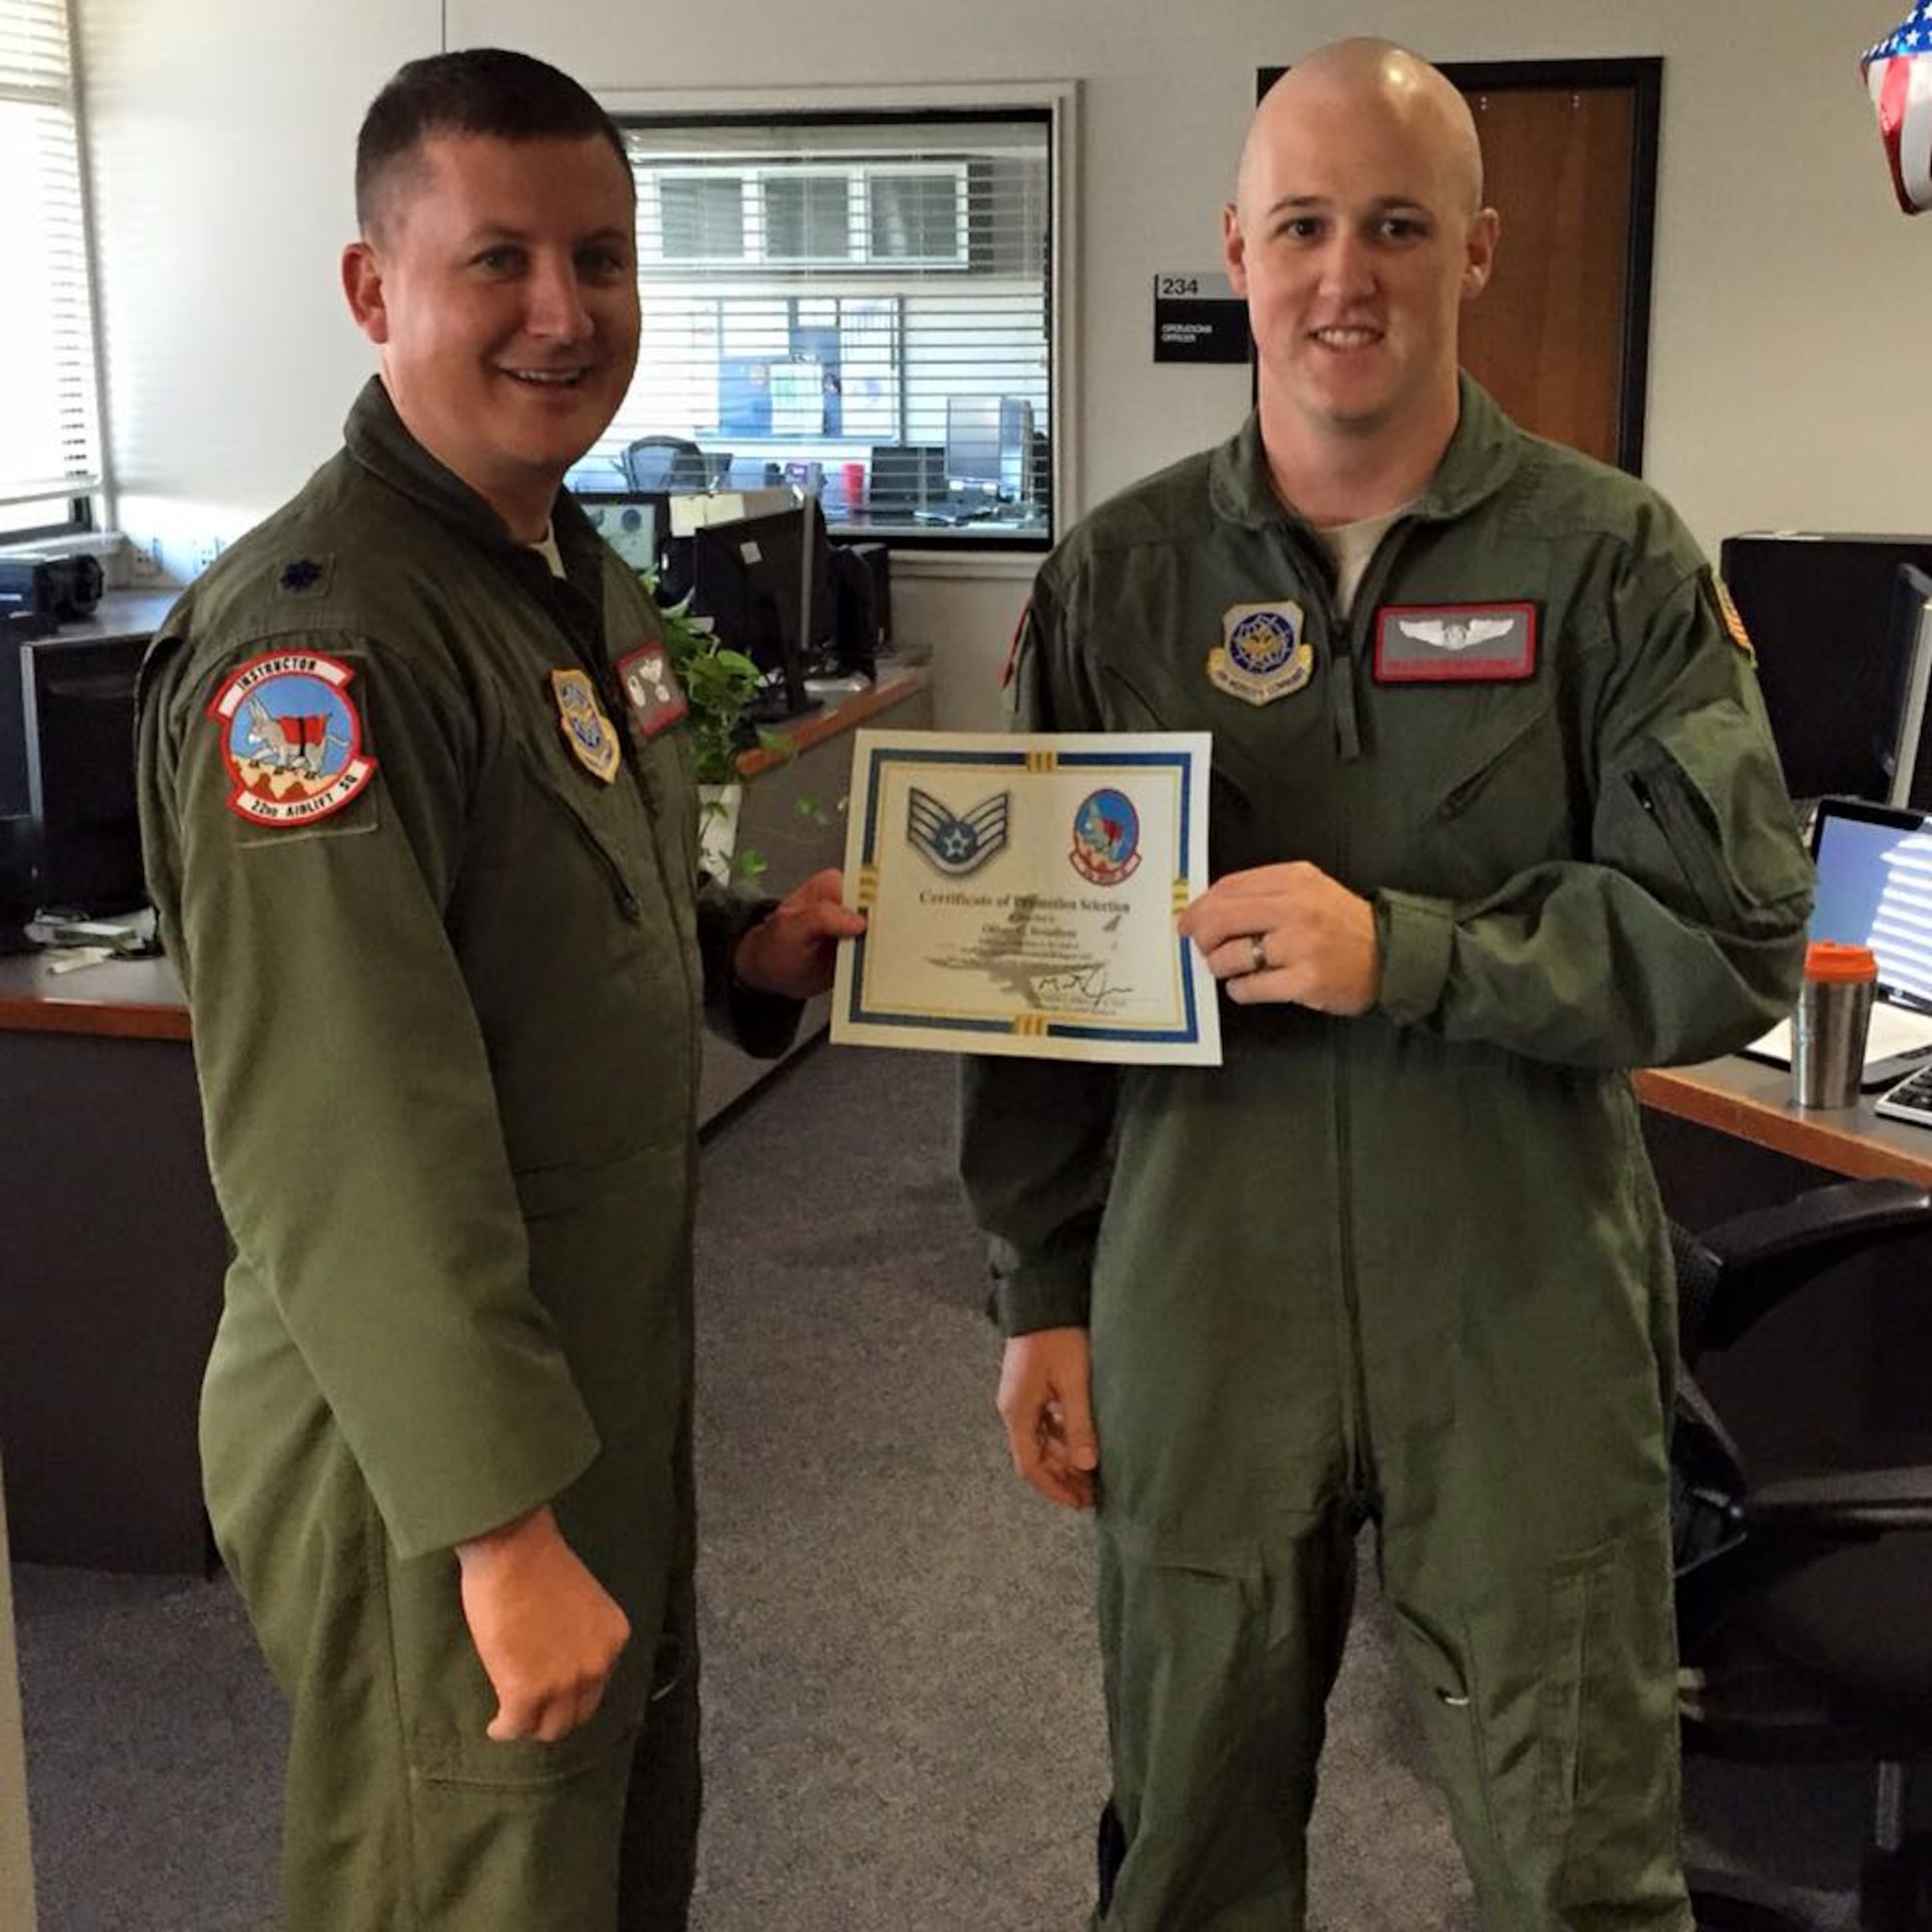 U.S. Air Force Lt. Col. Matthew Jones, the former 22nd Airlift Squadron commander, presents U.S. Air Force Staff Sgt. Oliver Broadbent, 22nd Airlift Squadron loadmaster, with a promotion certificate at Travis Air Force Base, Calif. (Courtesy photo)